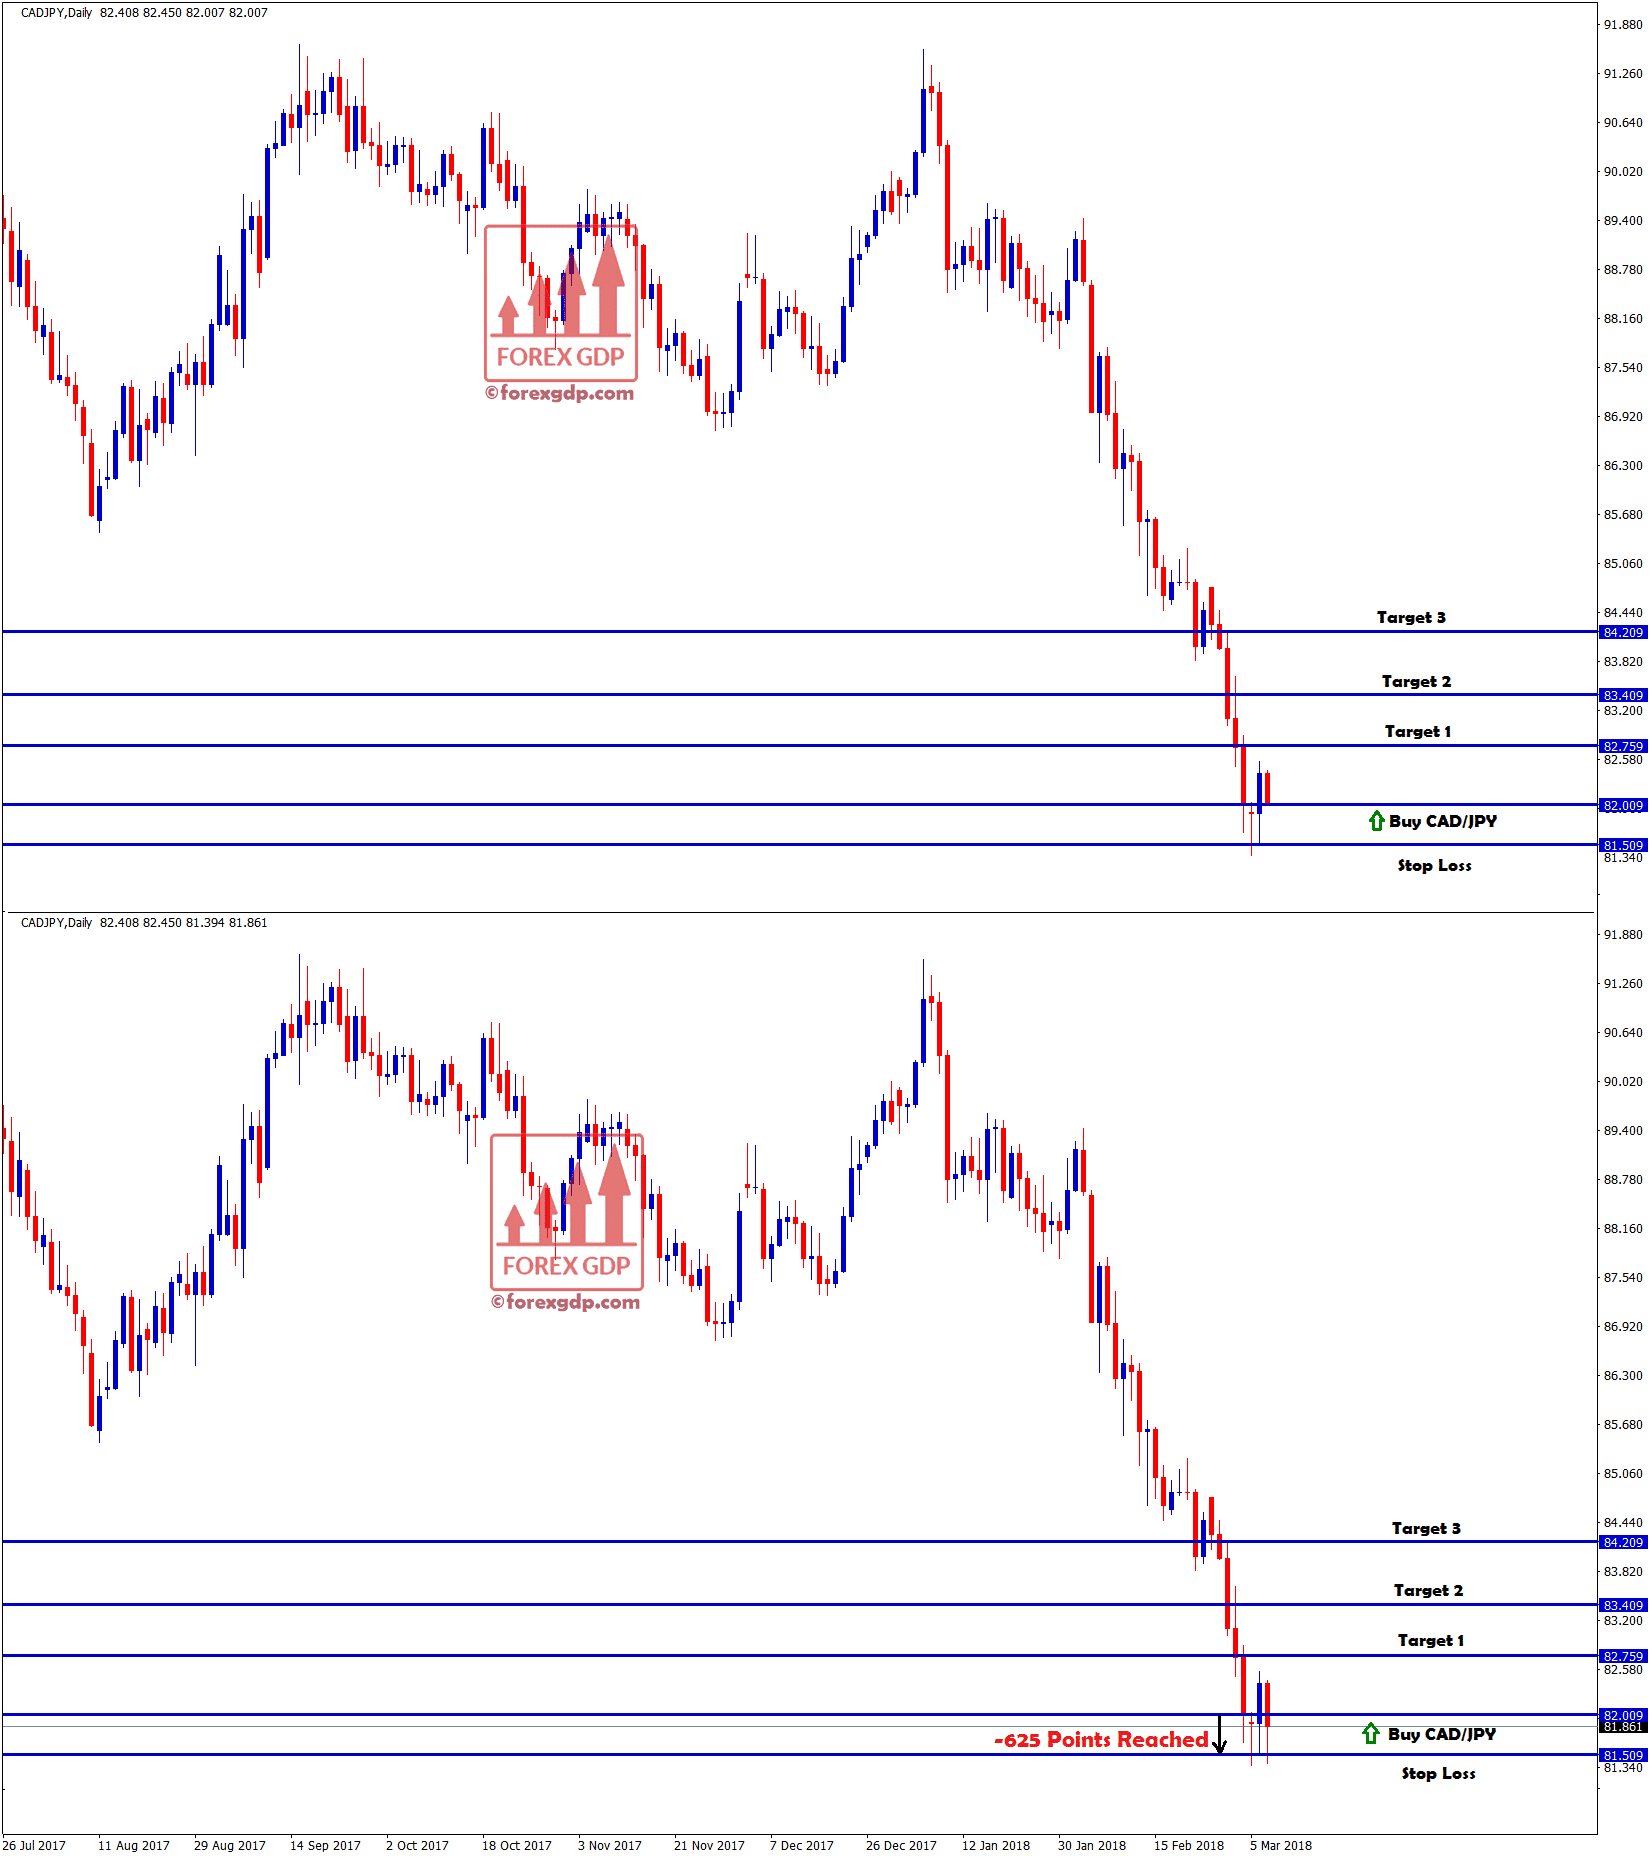 cadjpy reached the stop loss with -625 points loss